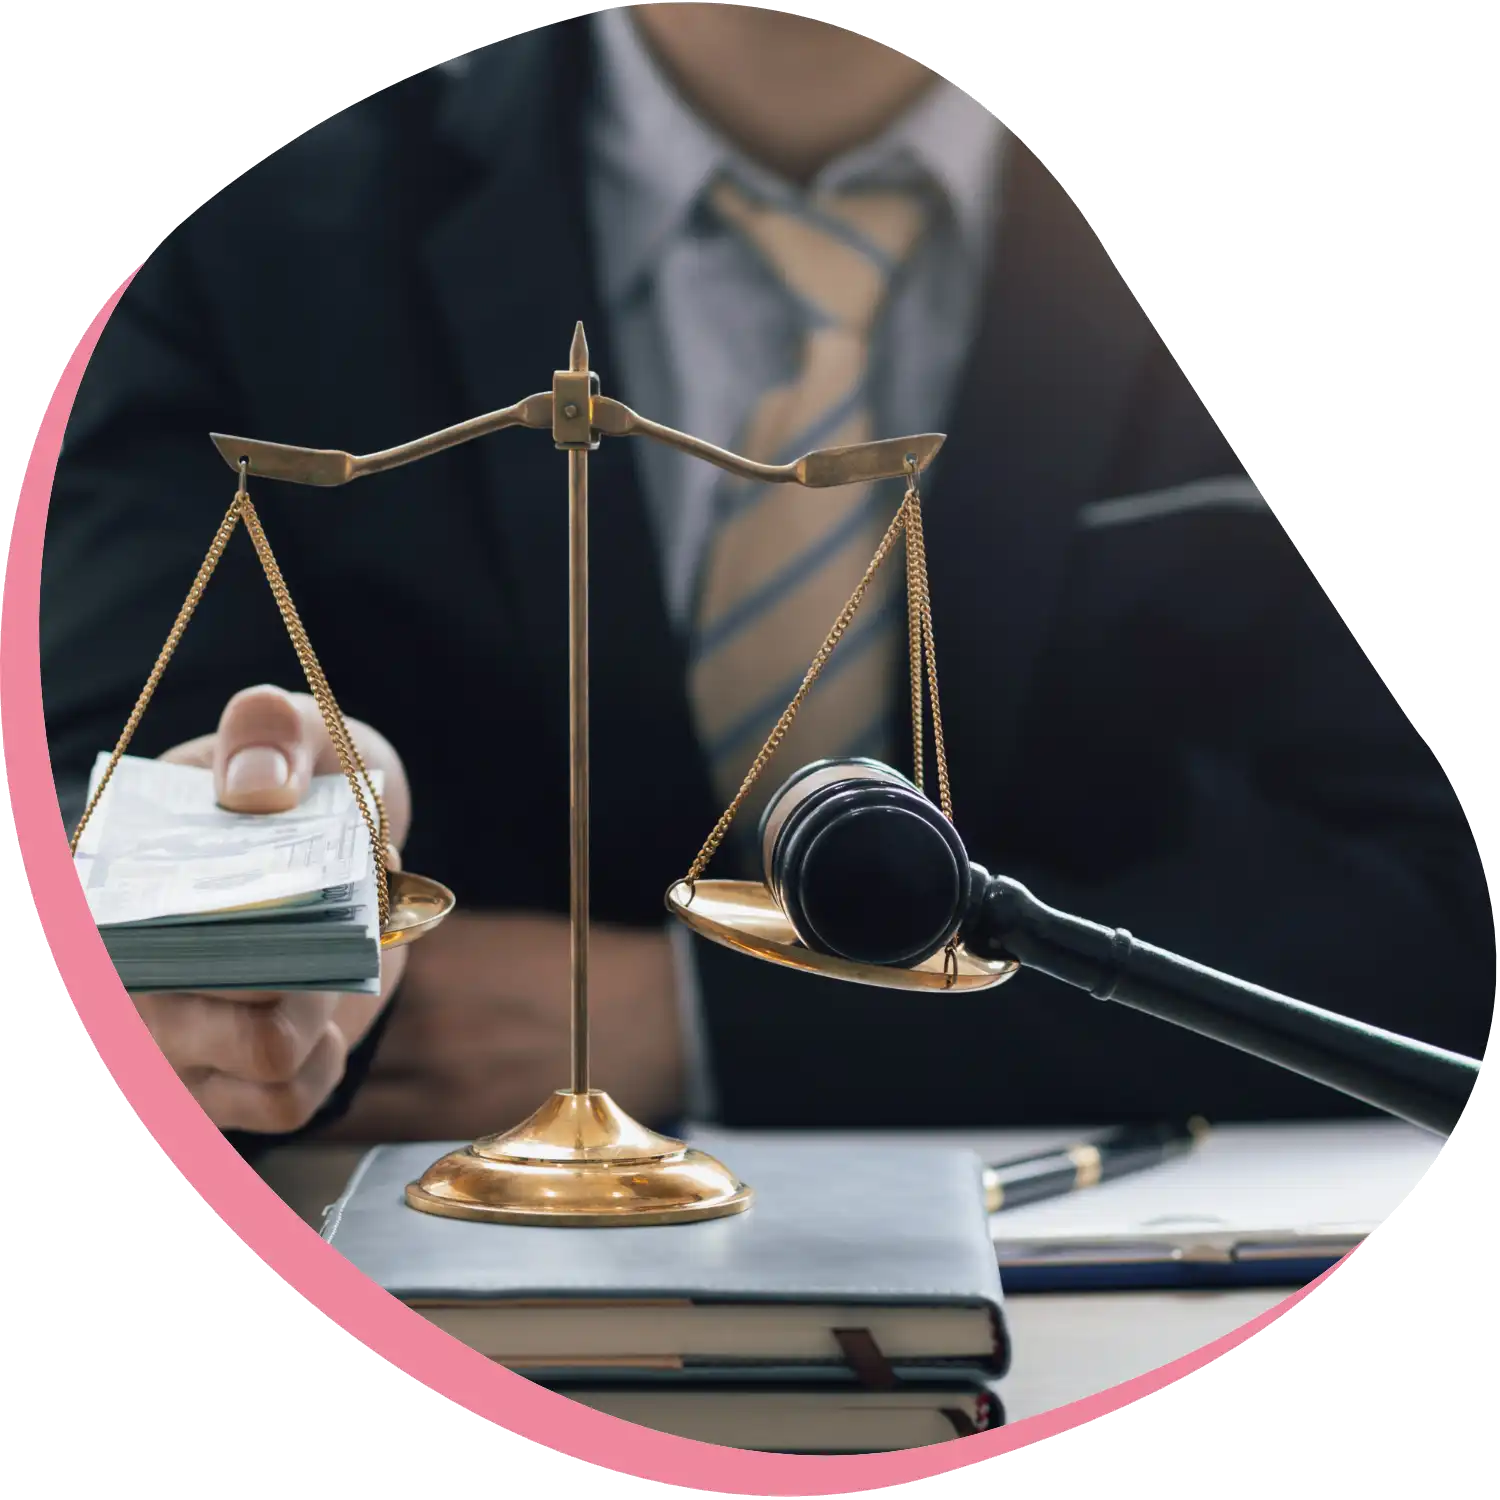 Cases We Fund - LawsuitLoans.io provides funding for a variety of cases, including: personal injury, mass tort, class action, employment claims, labor law and more.